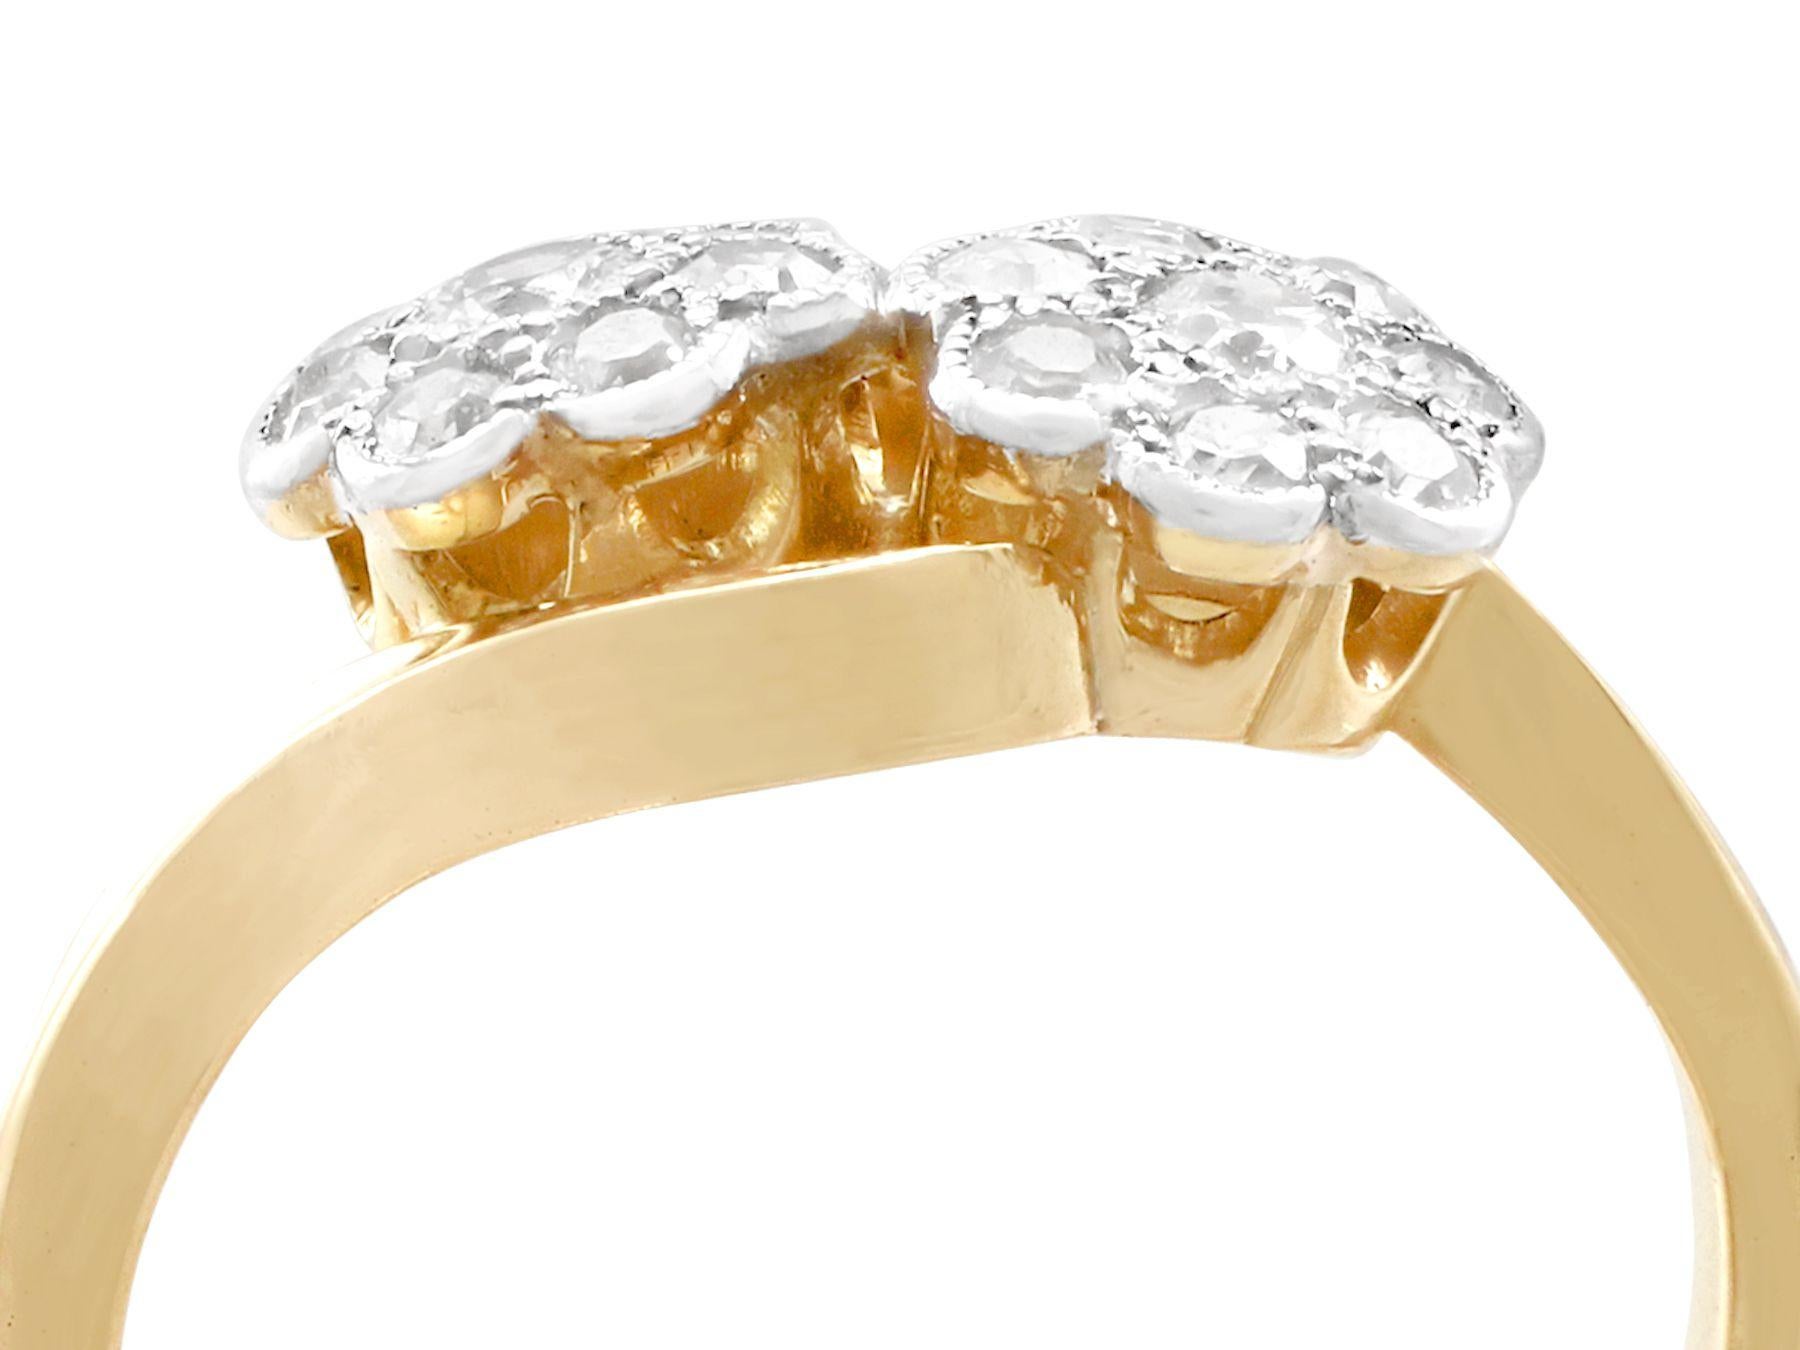 An impressive antique 0.48 carat diamond and 18 karat yellow gold, 18 karat white gold set twist ring; part of our diverse diamond jewelry collections

This fine and impressive antique diamond ring has been crafted in 18k yellow gold with an 18k